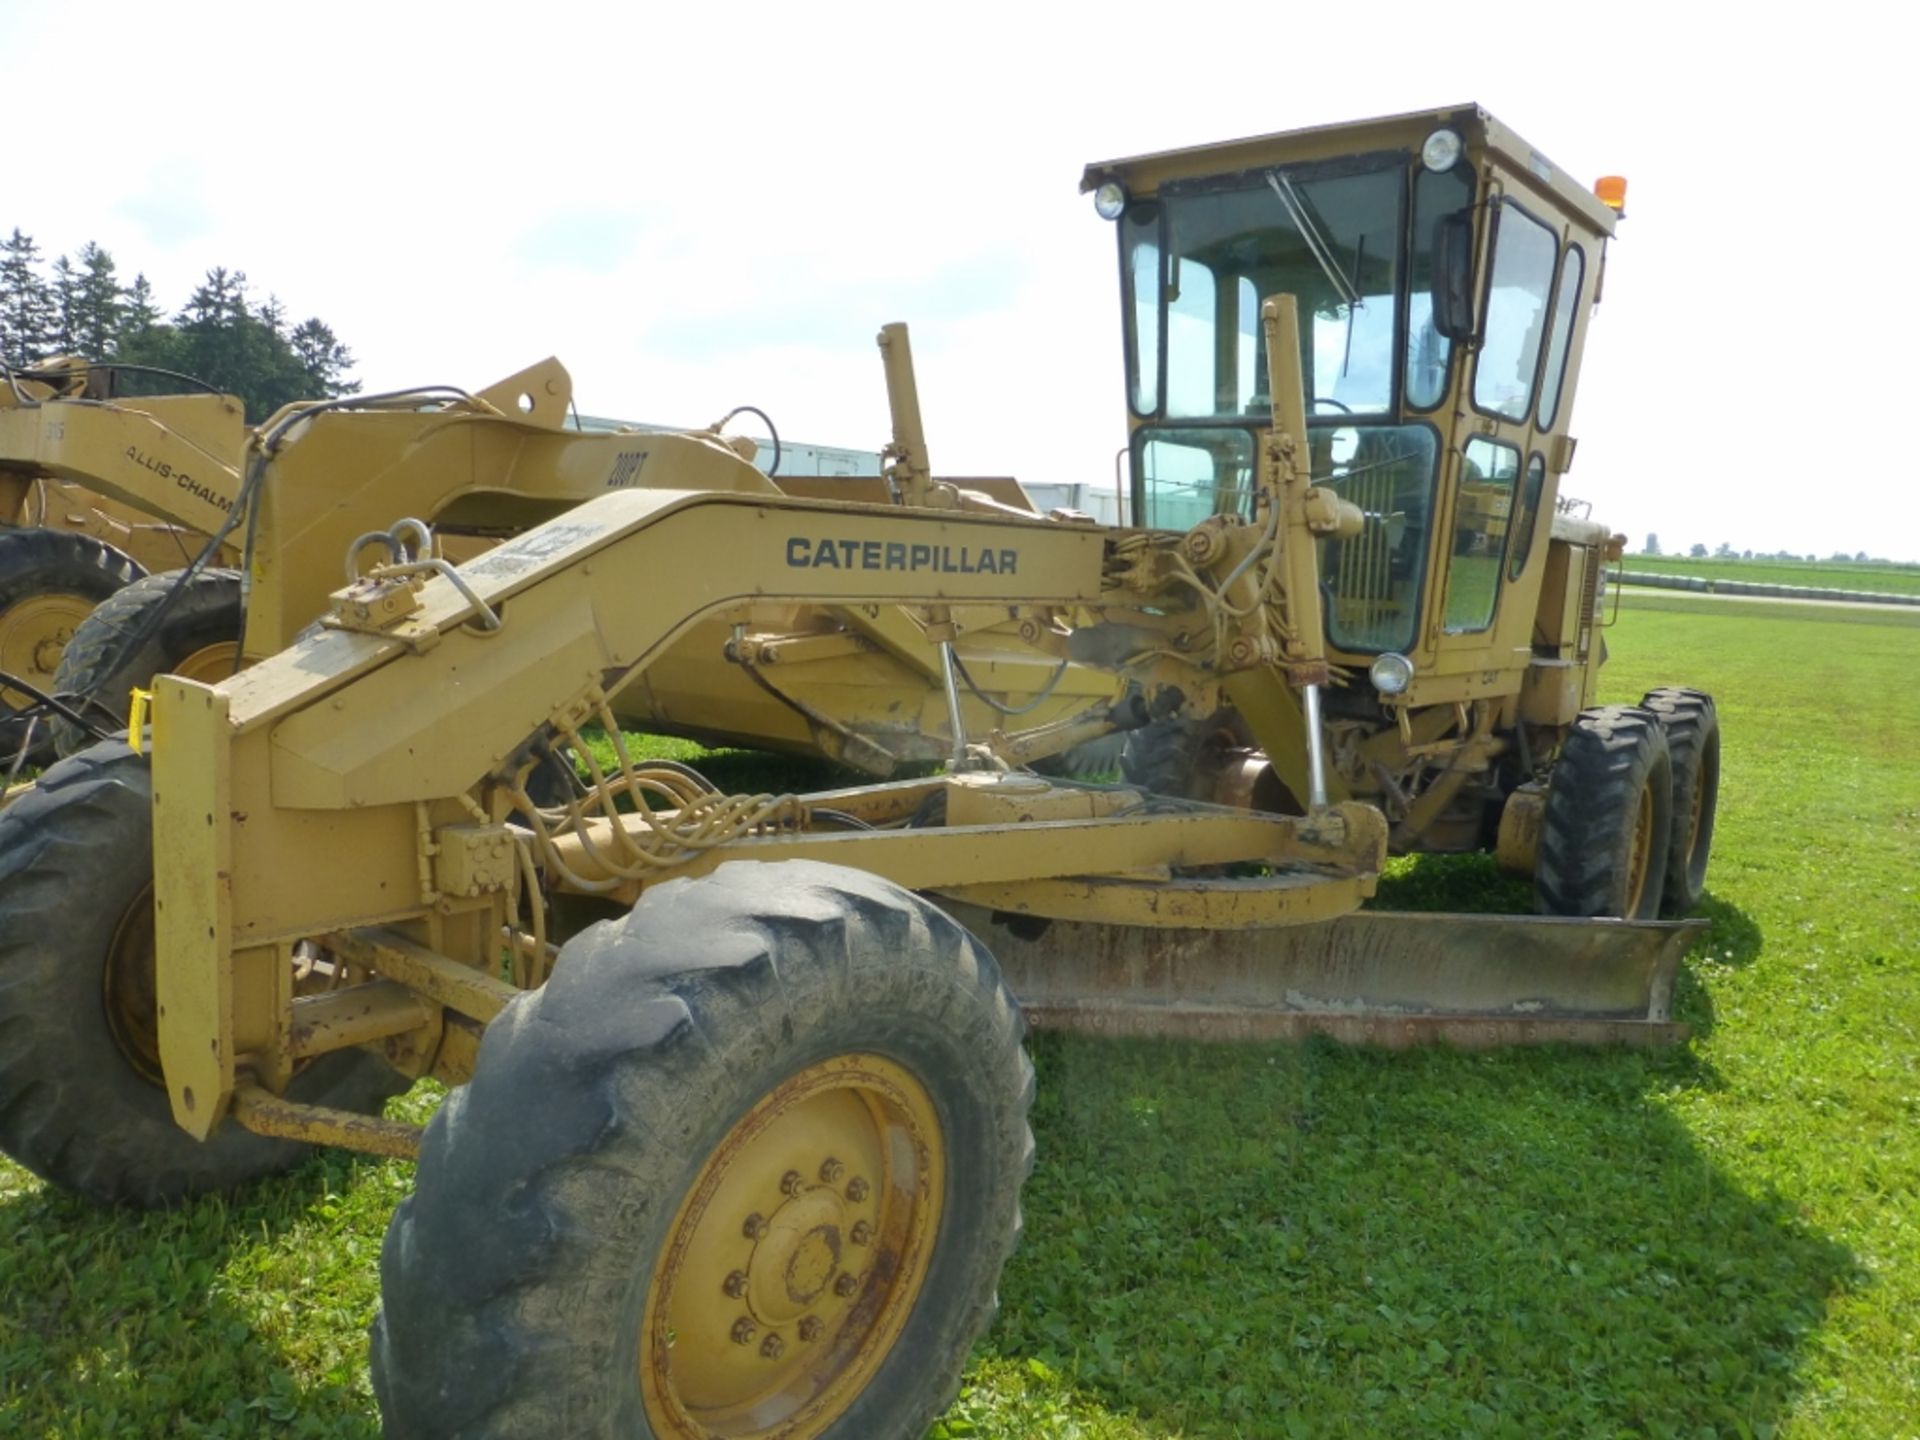 Caterpillar 120G motor grader with 13'10" moldboard se:87v871. Power shift. 7720 unverified hrs. - Image 15 of 27